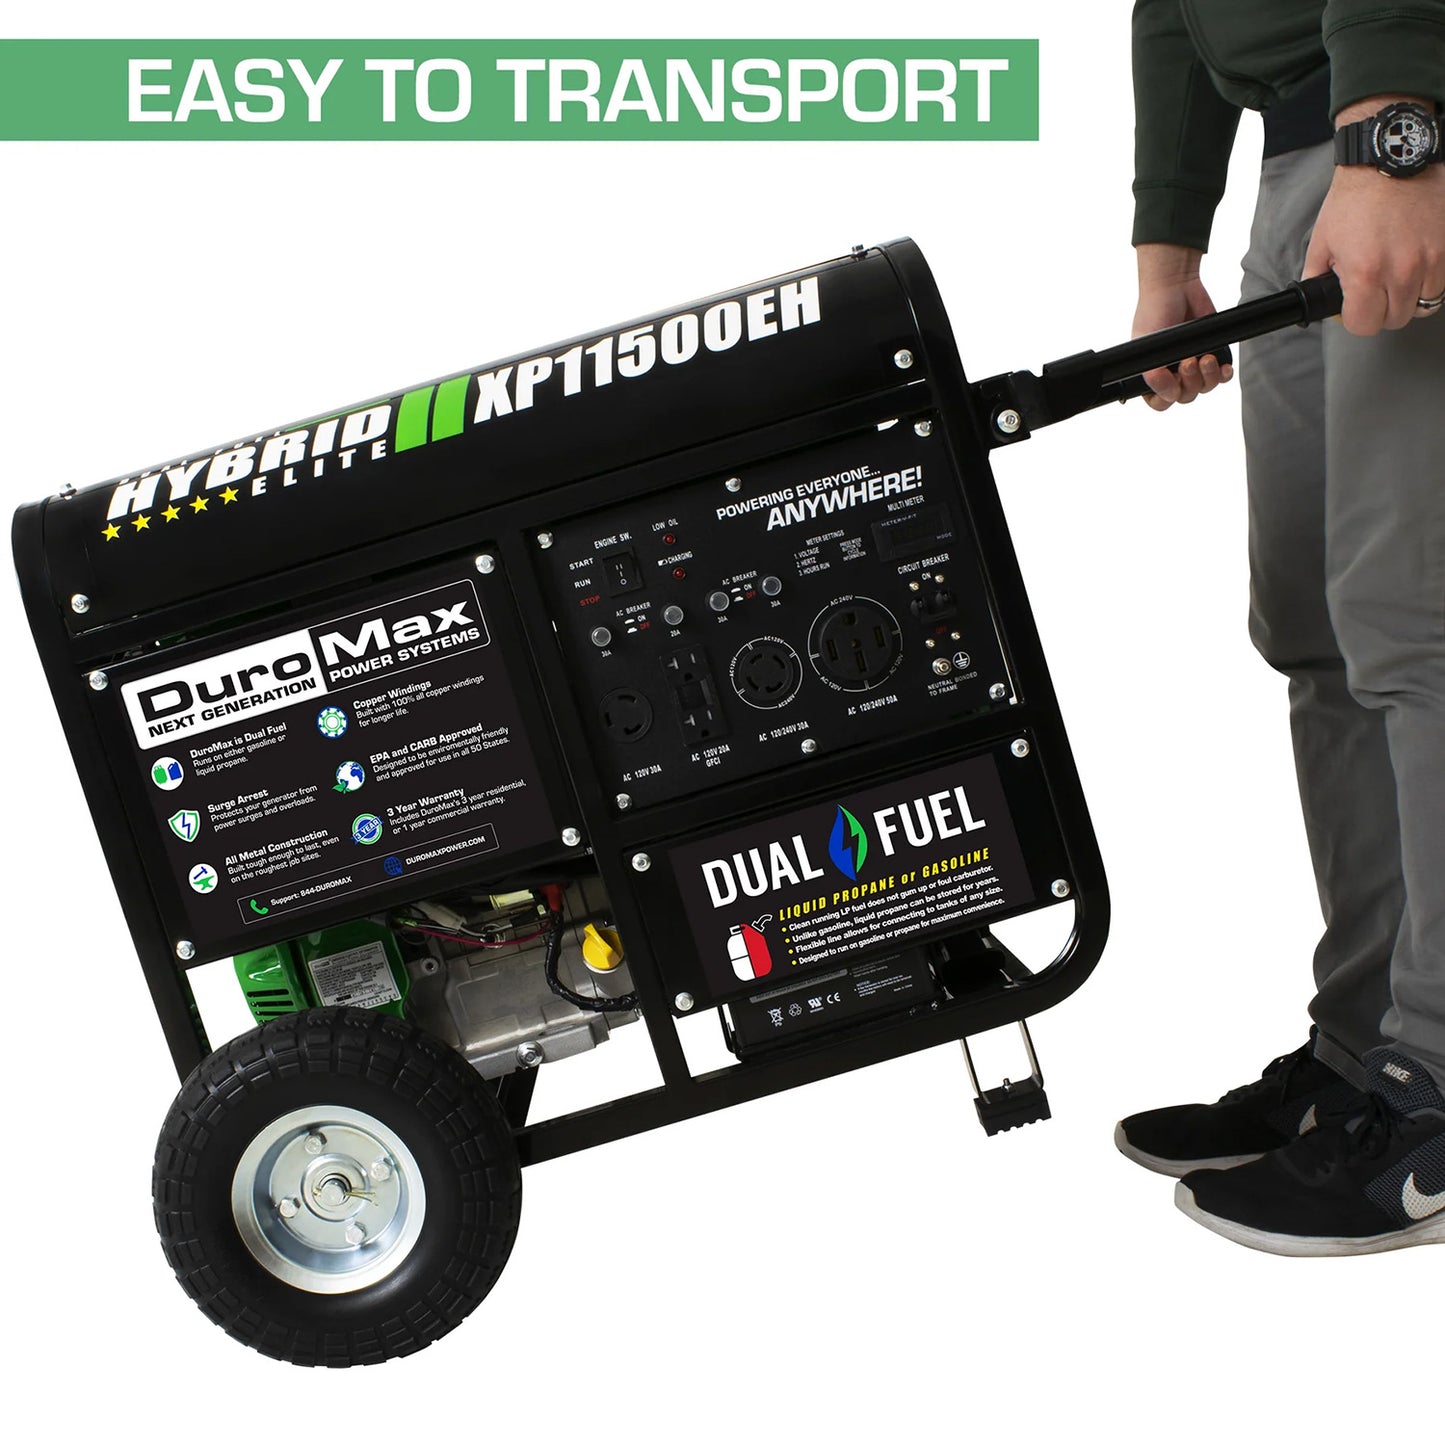 DuroMax XP11500EH Dual Fuel Portable Generator Is Easy To Transport